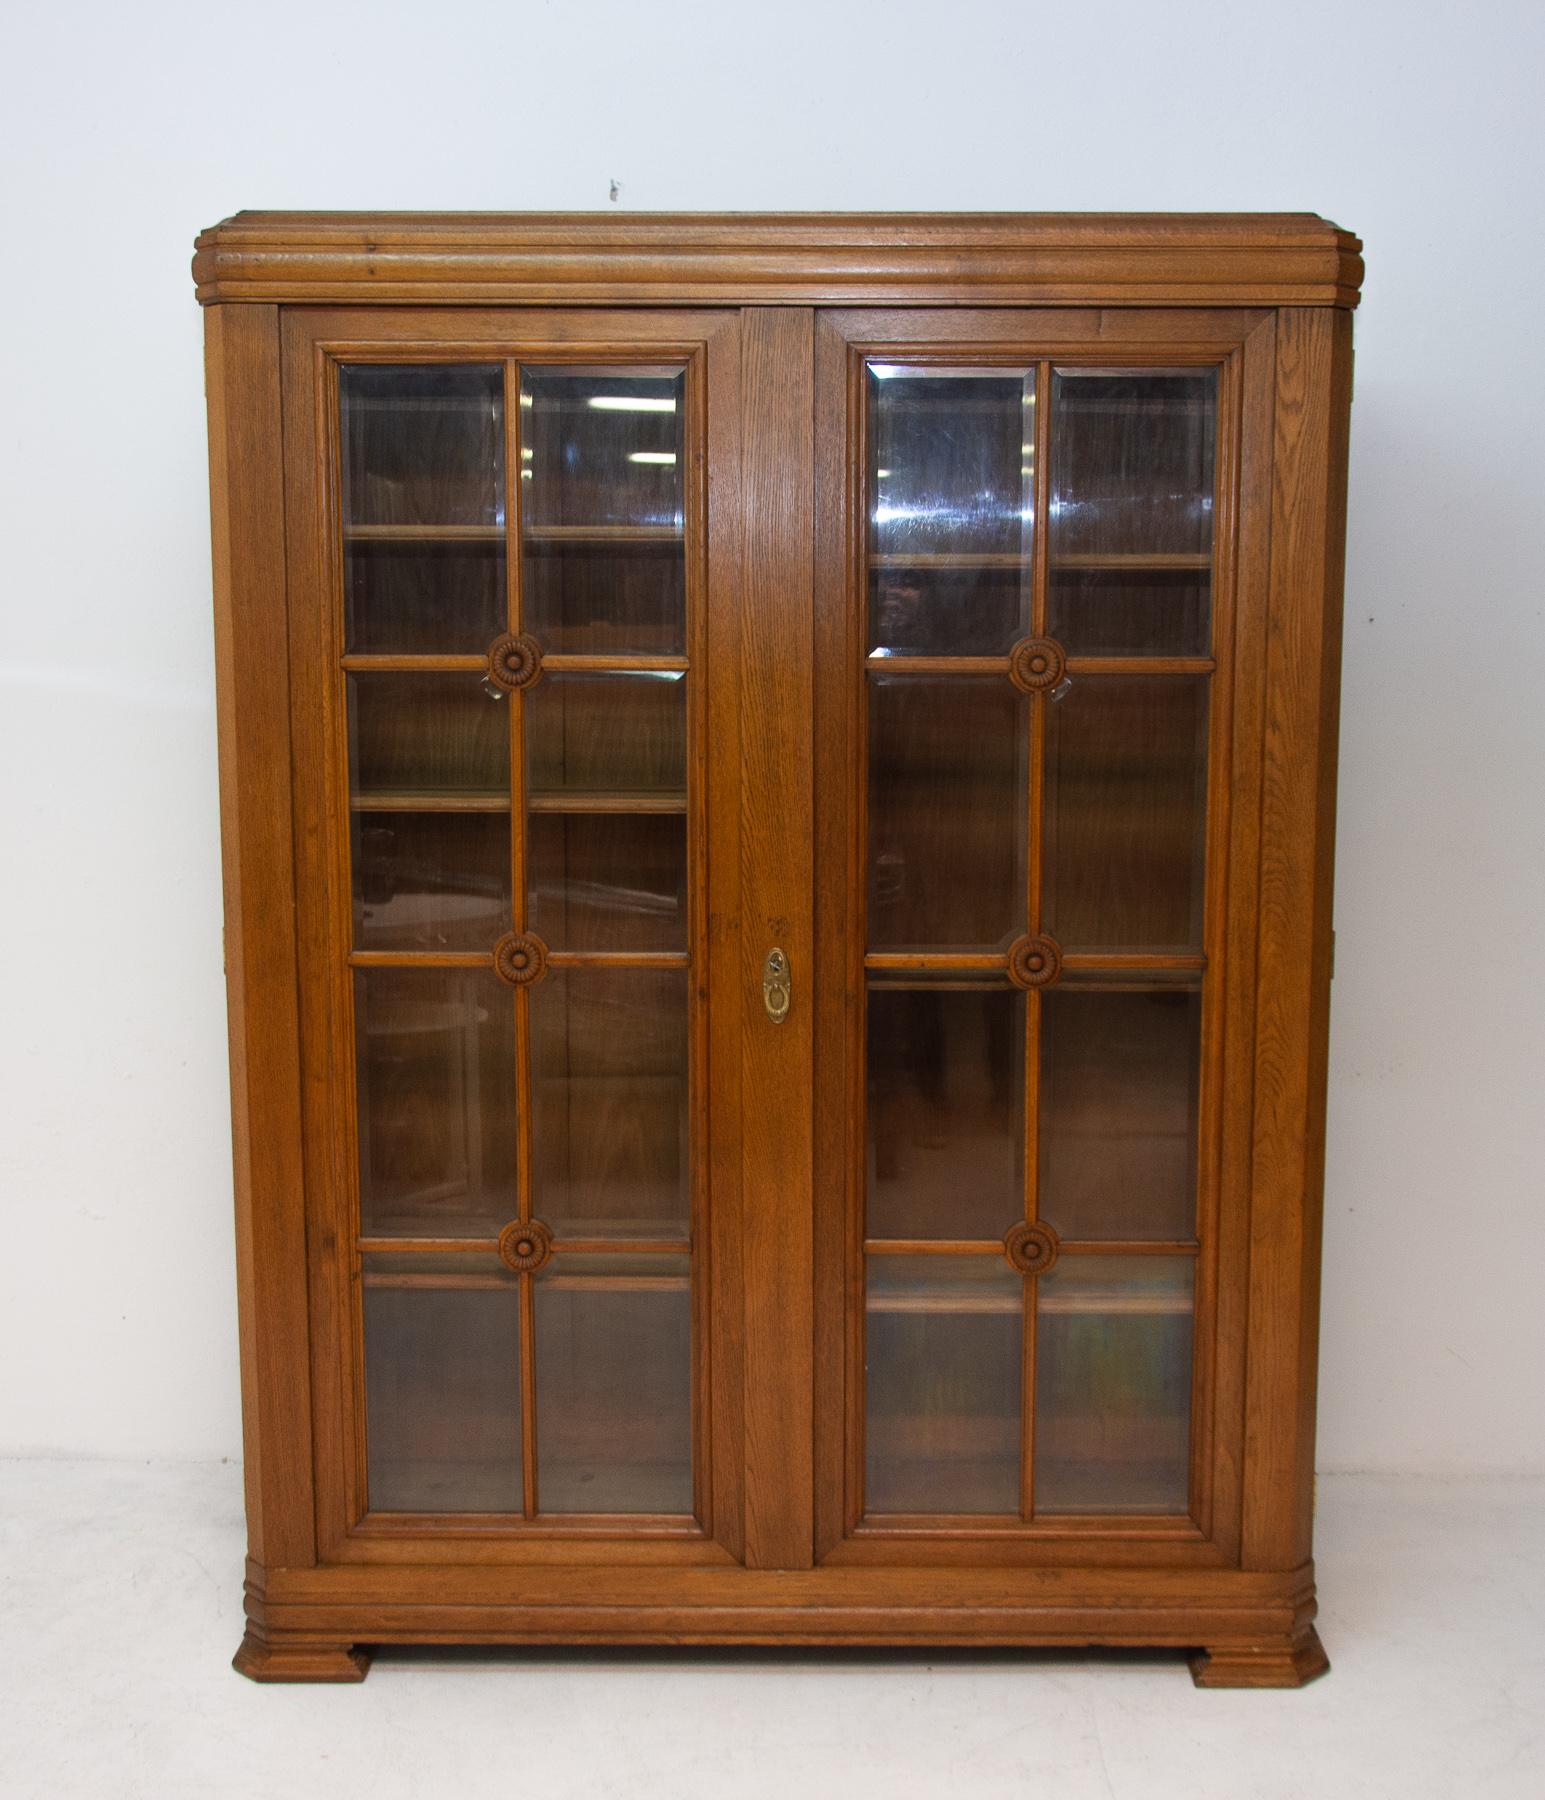 Art Deco library cabinet, made in the 1930s in Bohemia. It features a regular shapes, a solid structure, and four massive legs on which the library stands. It´s made of oakwood.
The cabinet is generally in good vintage condition with slight signs